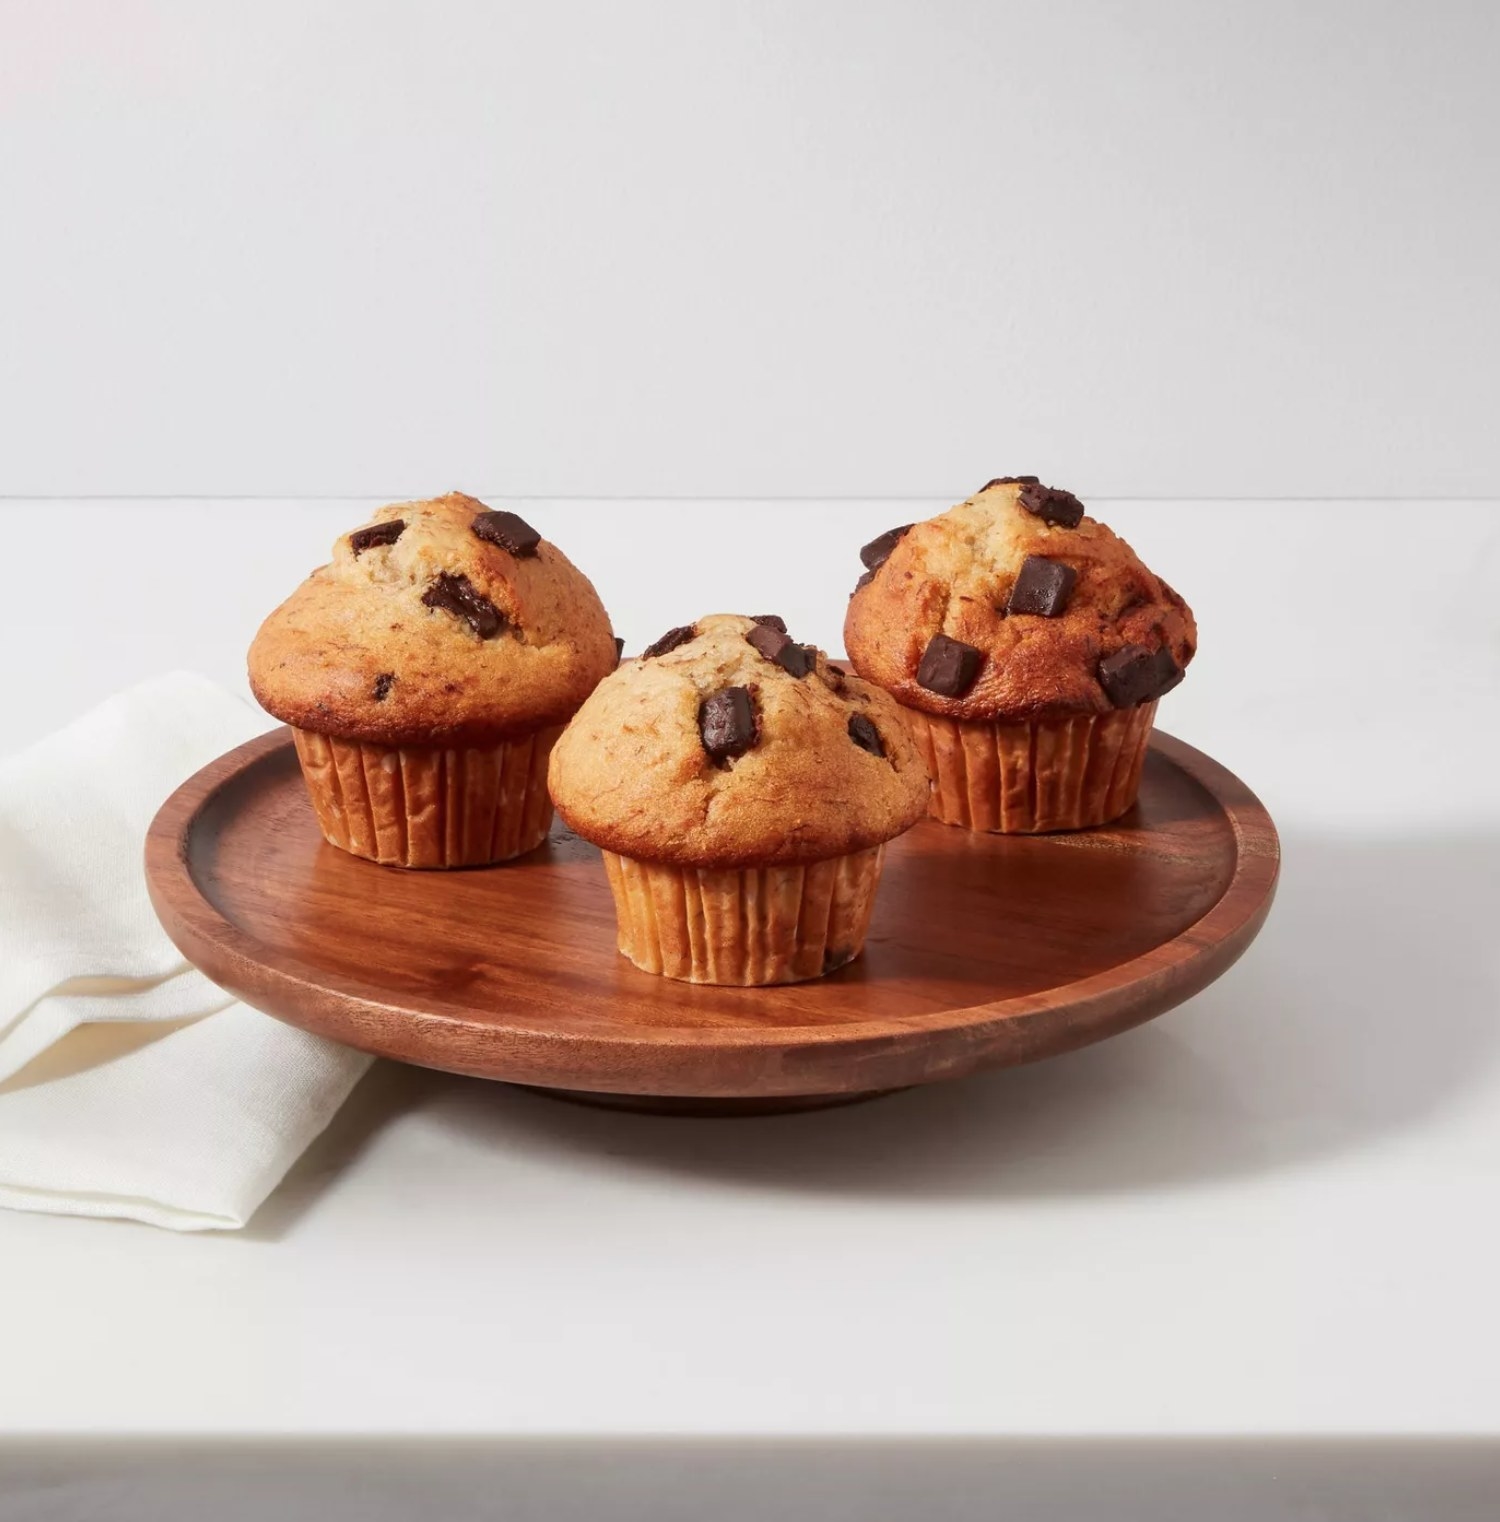 the wooden cake stand with three chocolate chip muffins on it and a white napkin next to it